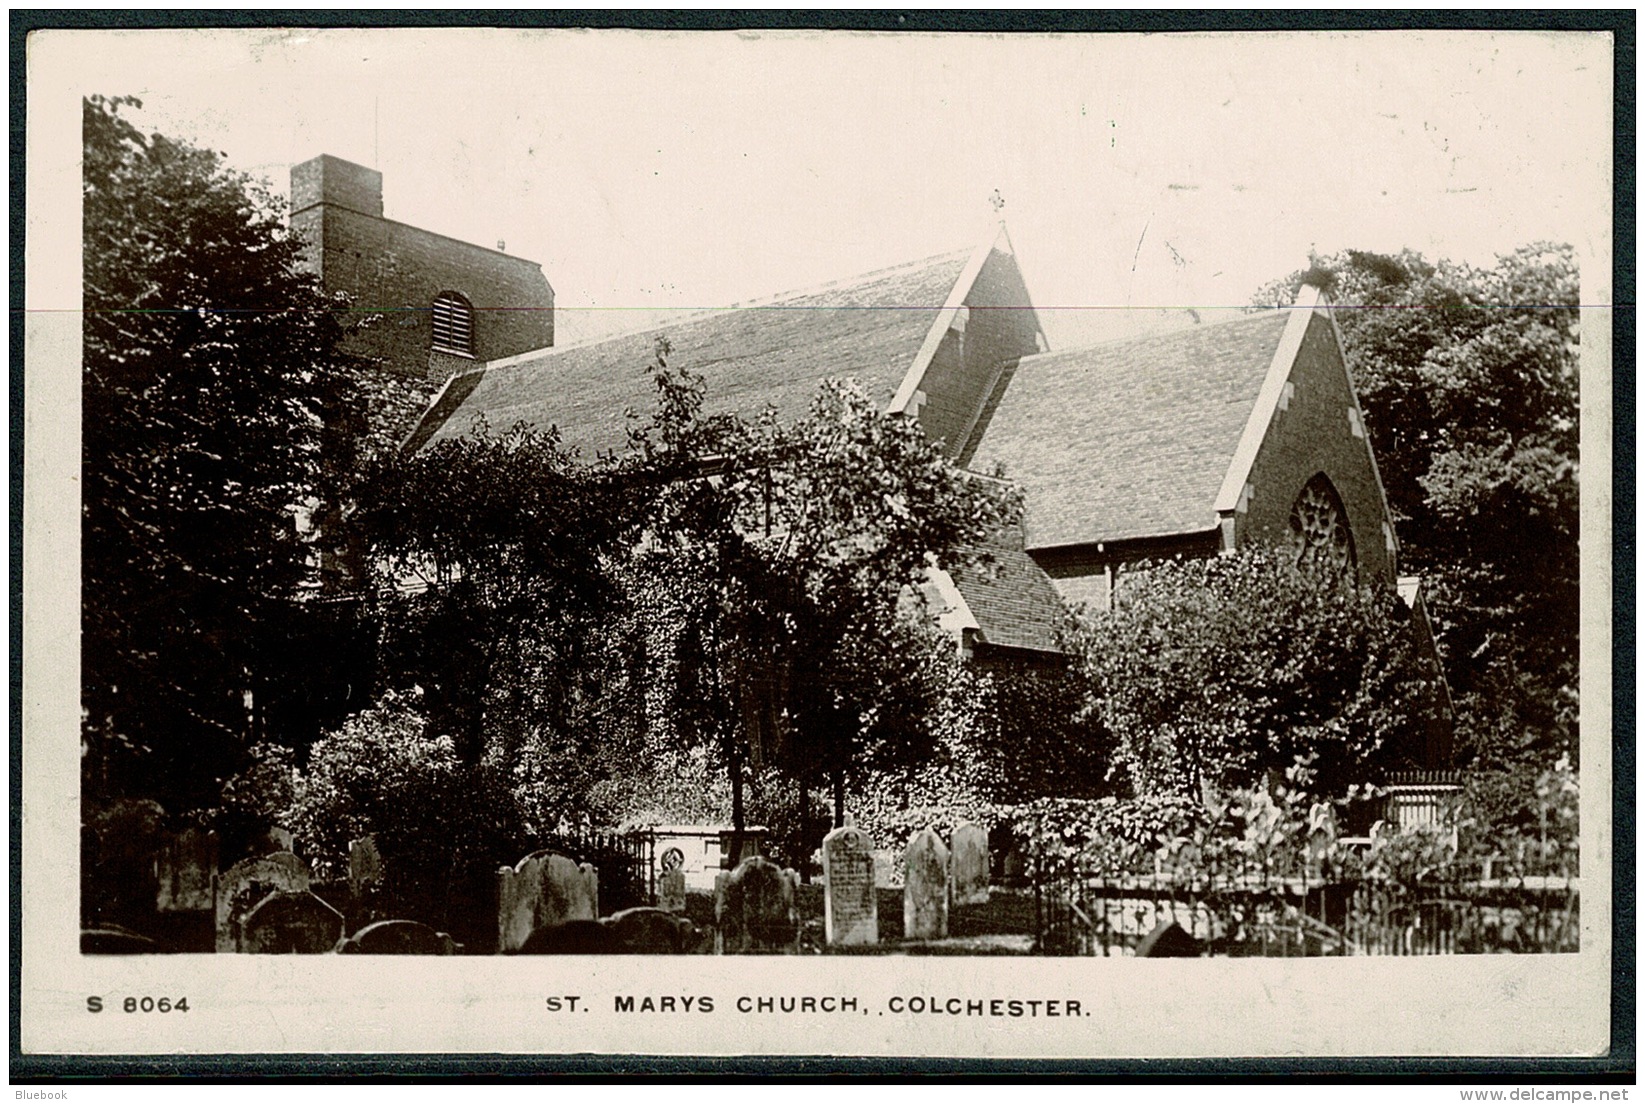 RB 1211 - 1913 Real Photo Postcard - St Marys Church Colchester - Essex - Colchester